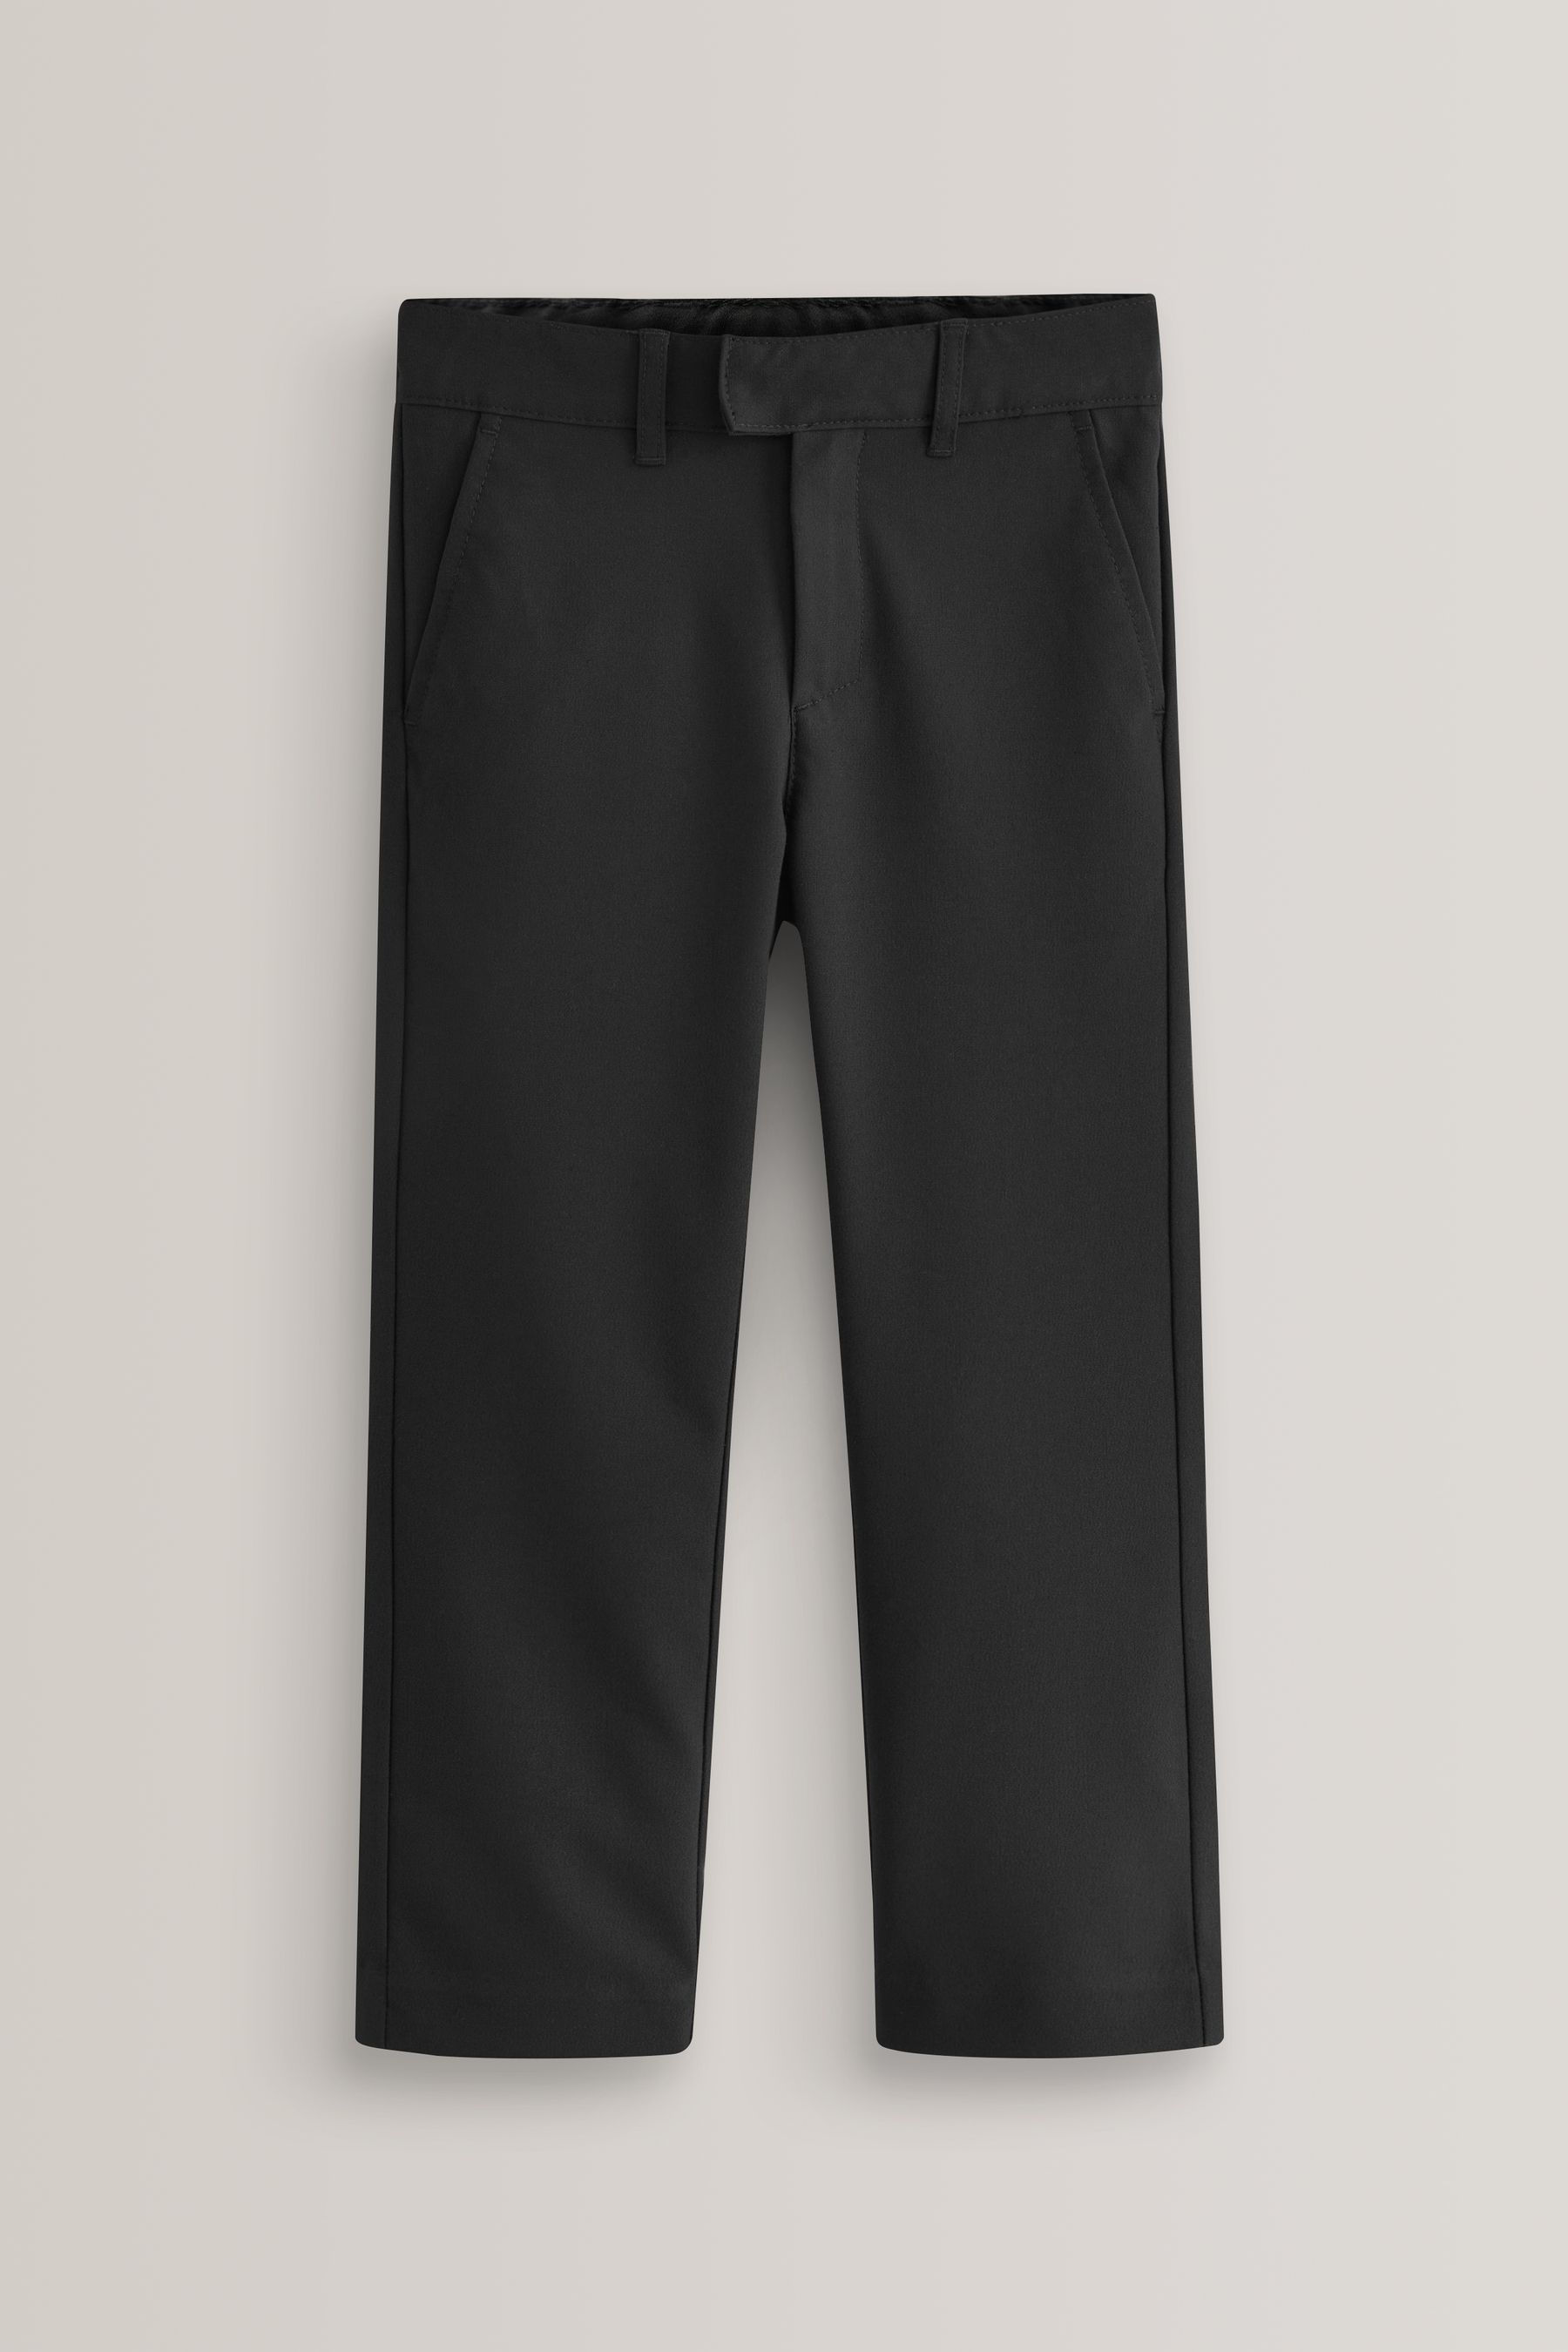 Buy School Formal Stretch Skinny Trousers (3-17yrs) from Next USA